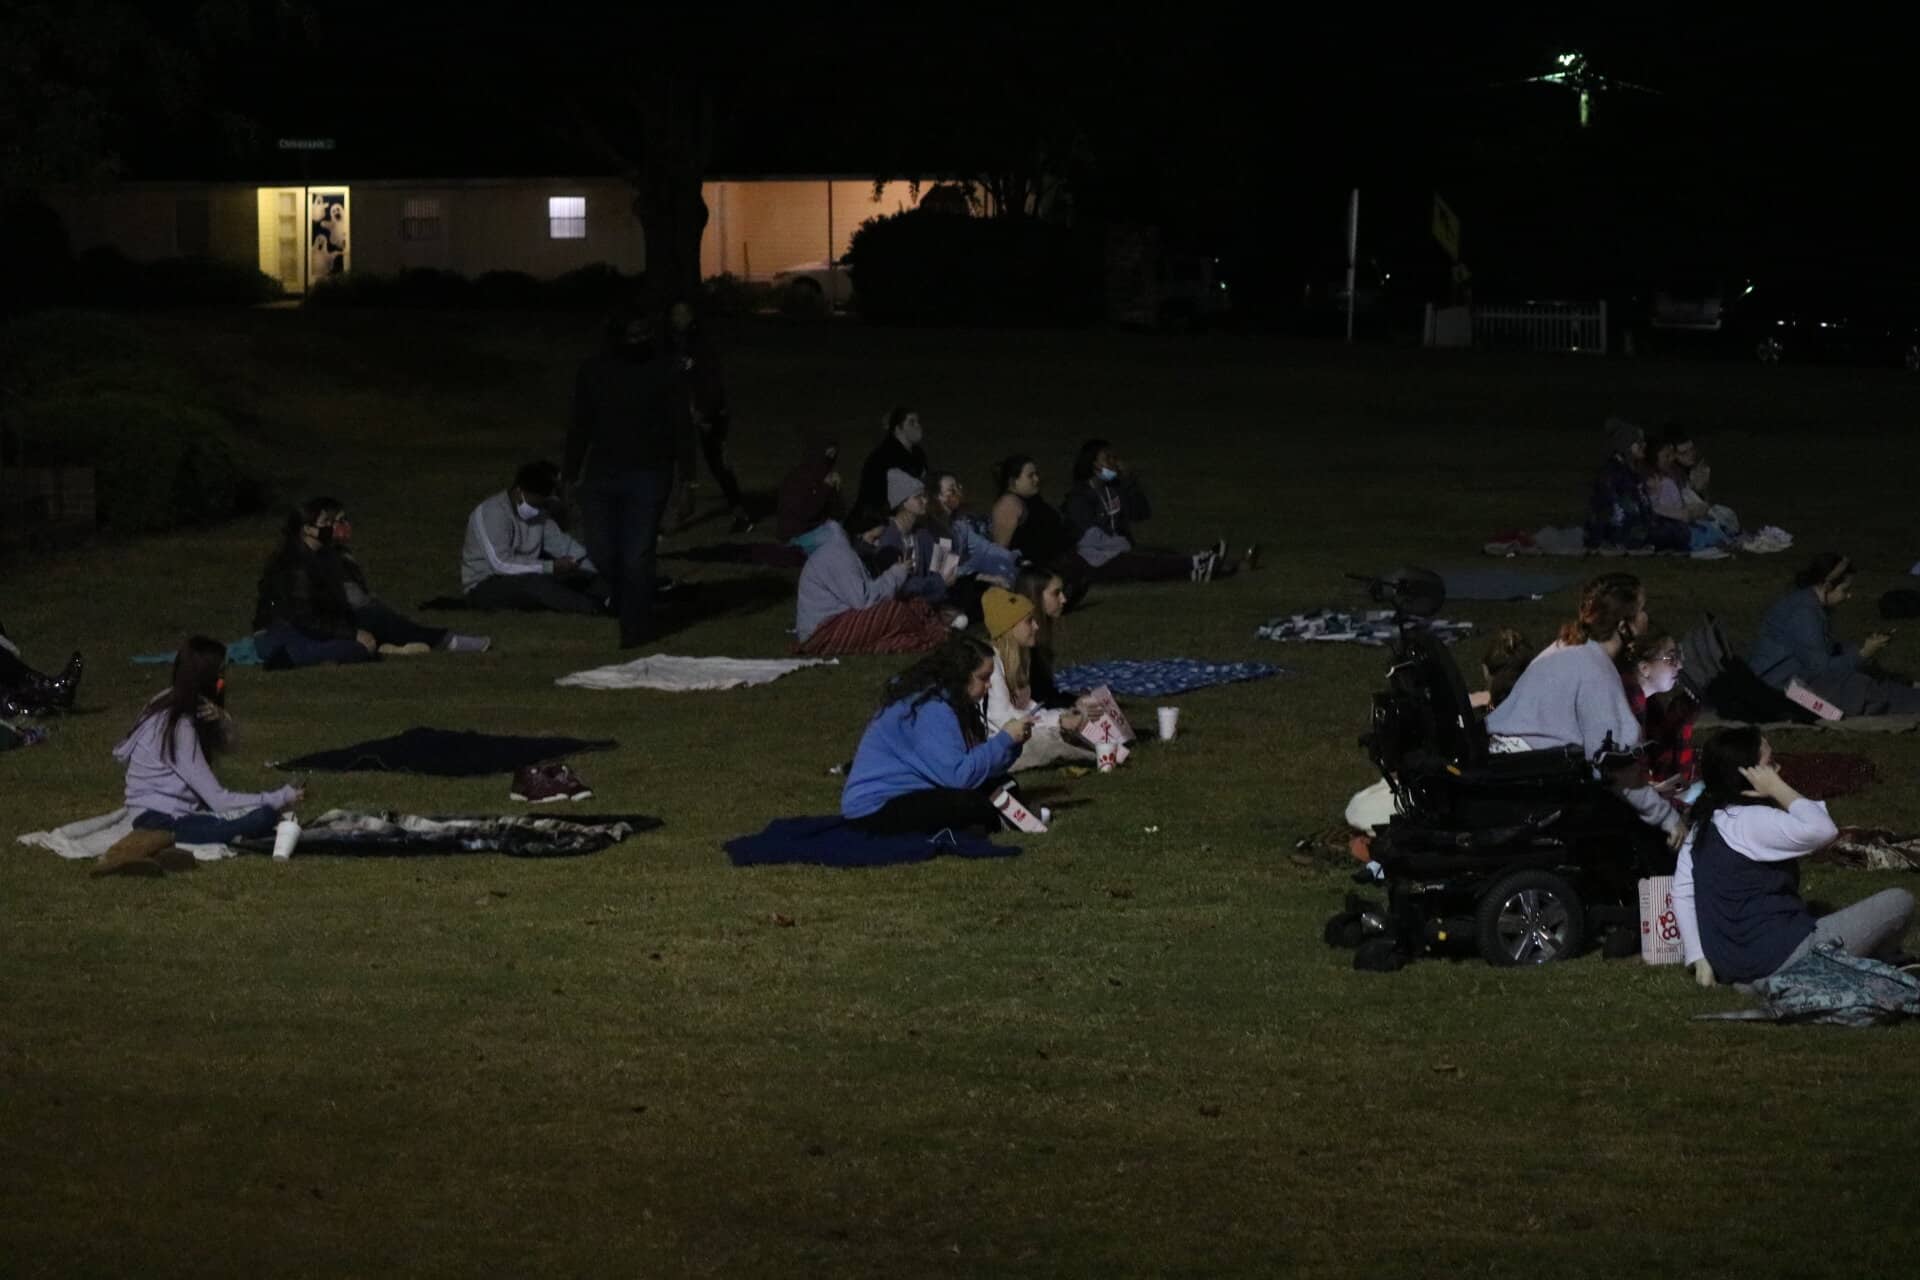 Students gather together to enjoy Hocus Pocus under the stars.